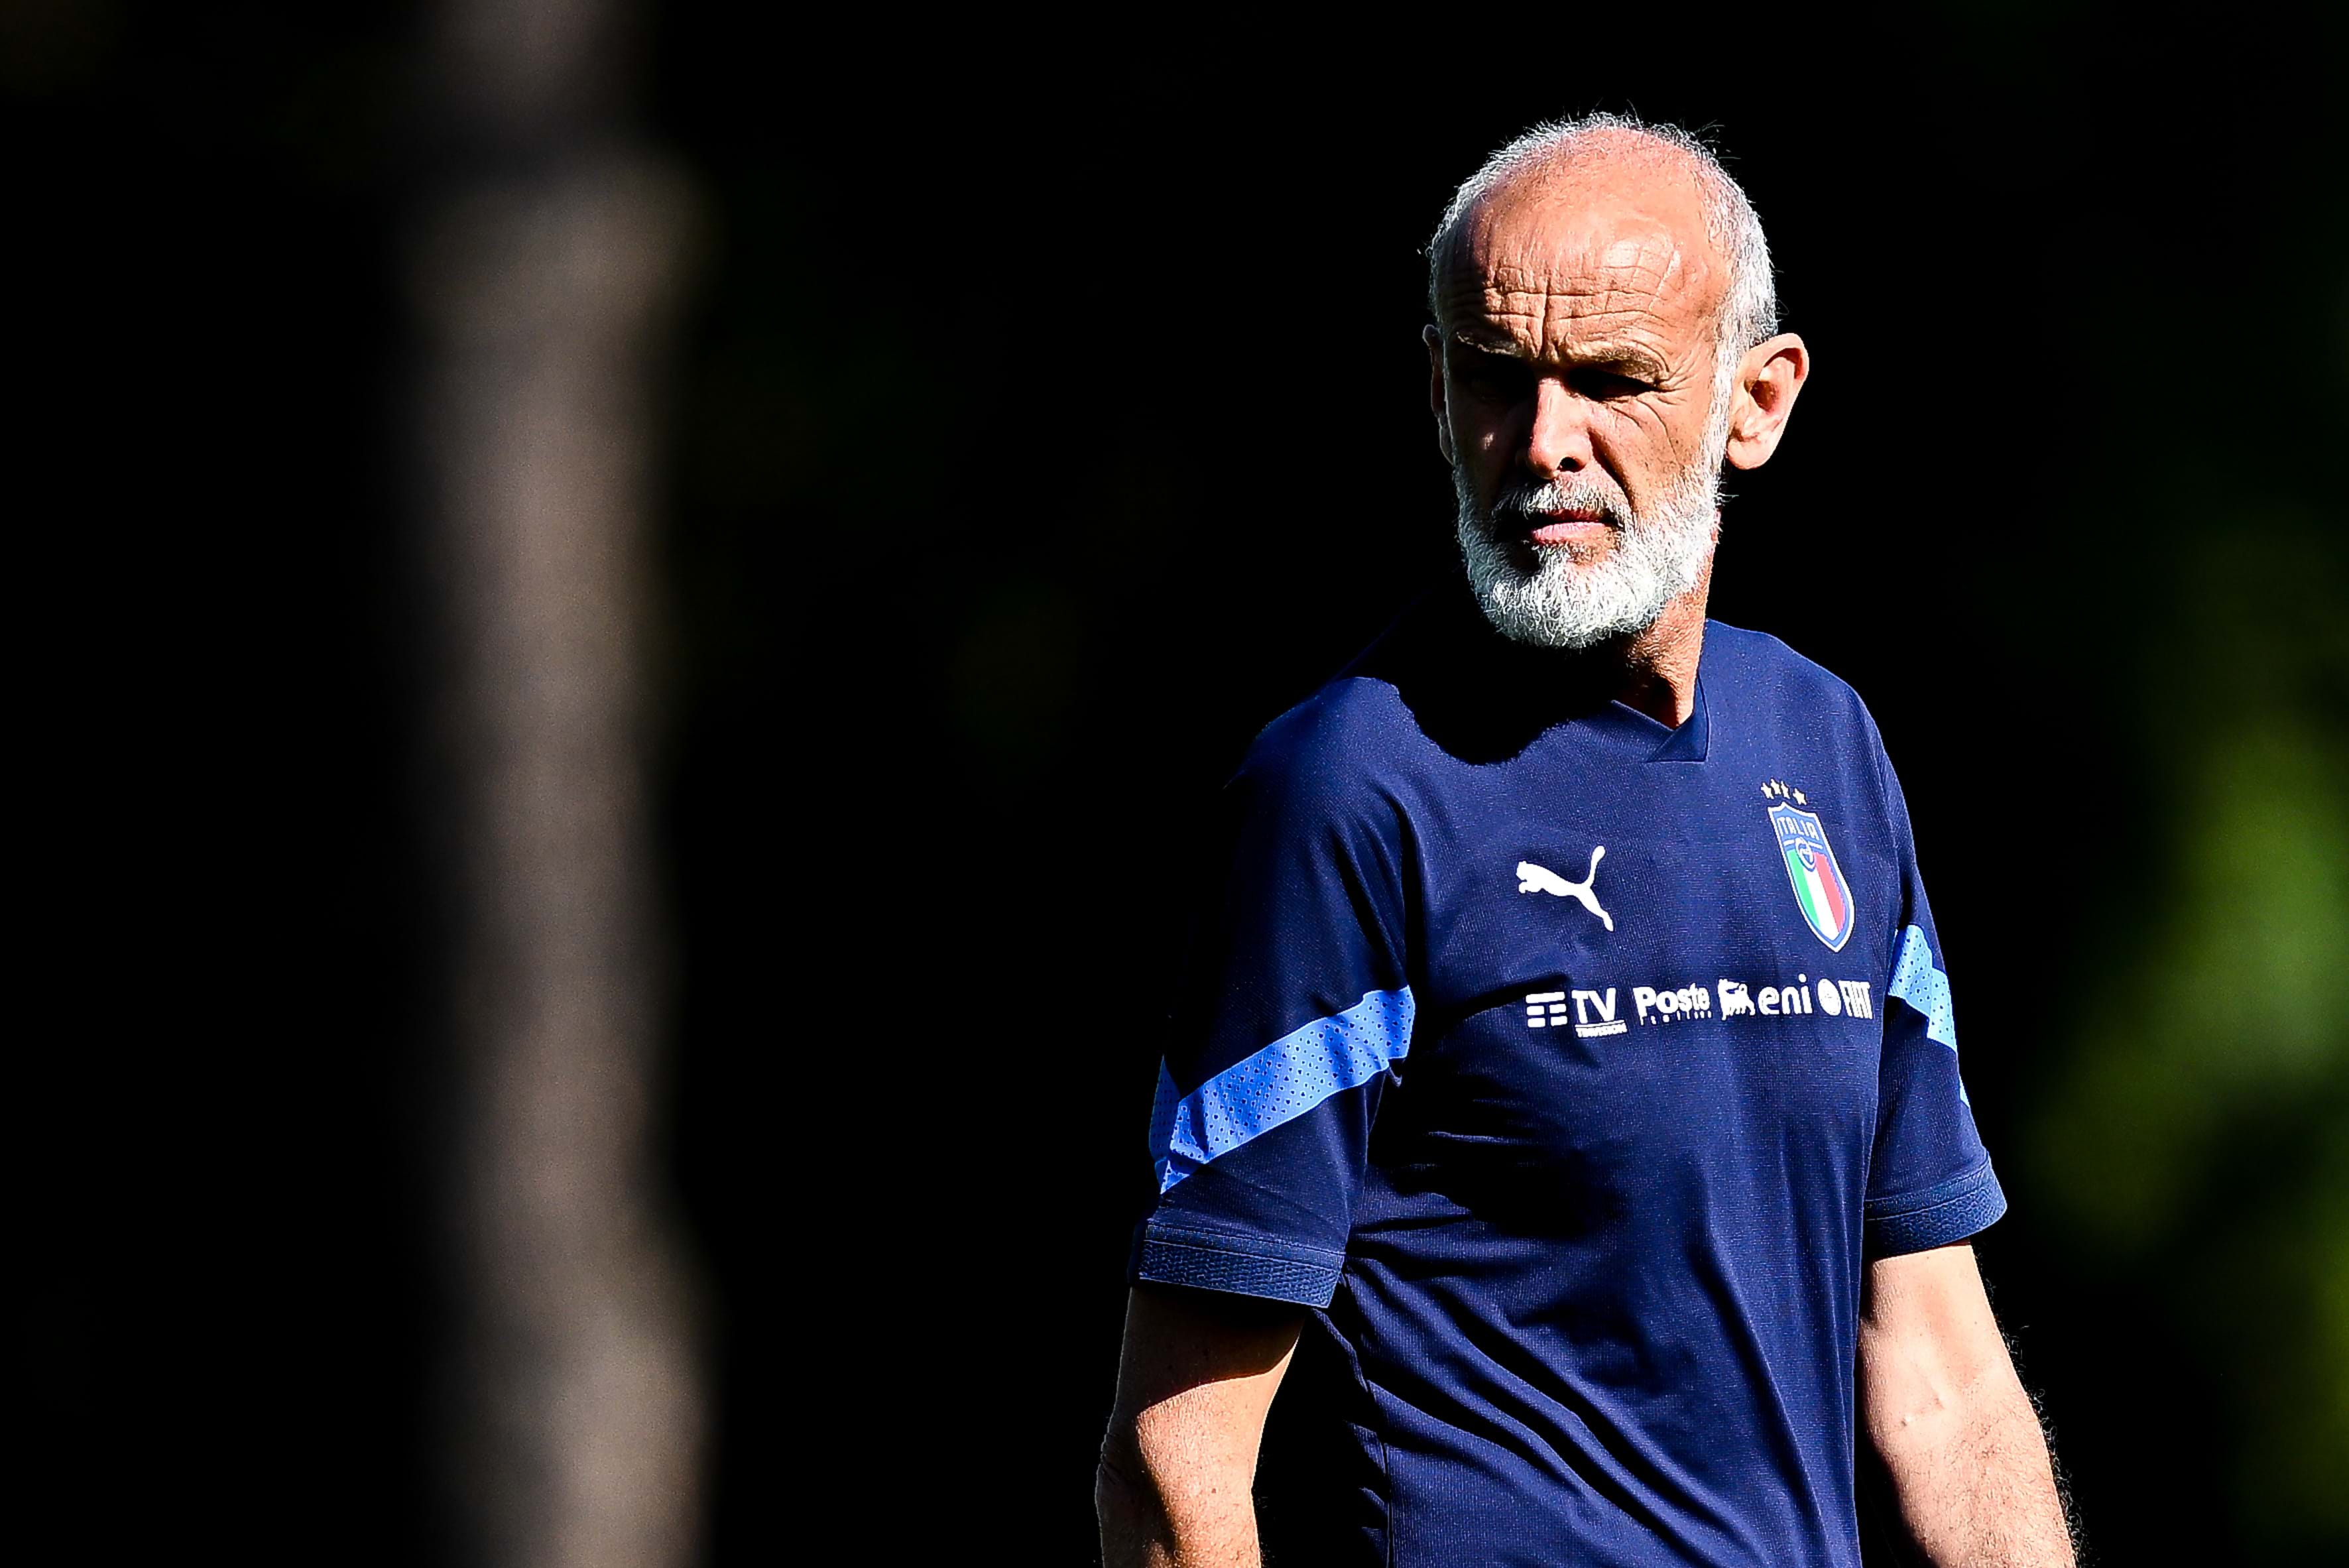 Italy vs Germany on Saturday, Ancona aims to spur on the Azzurrini. Nicolato: "We have the ambition to compete with the strongest sides"